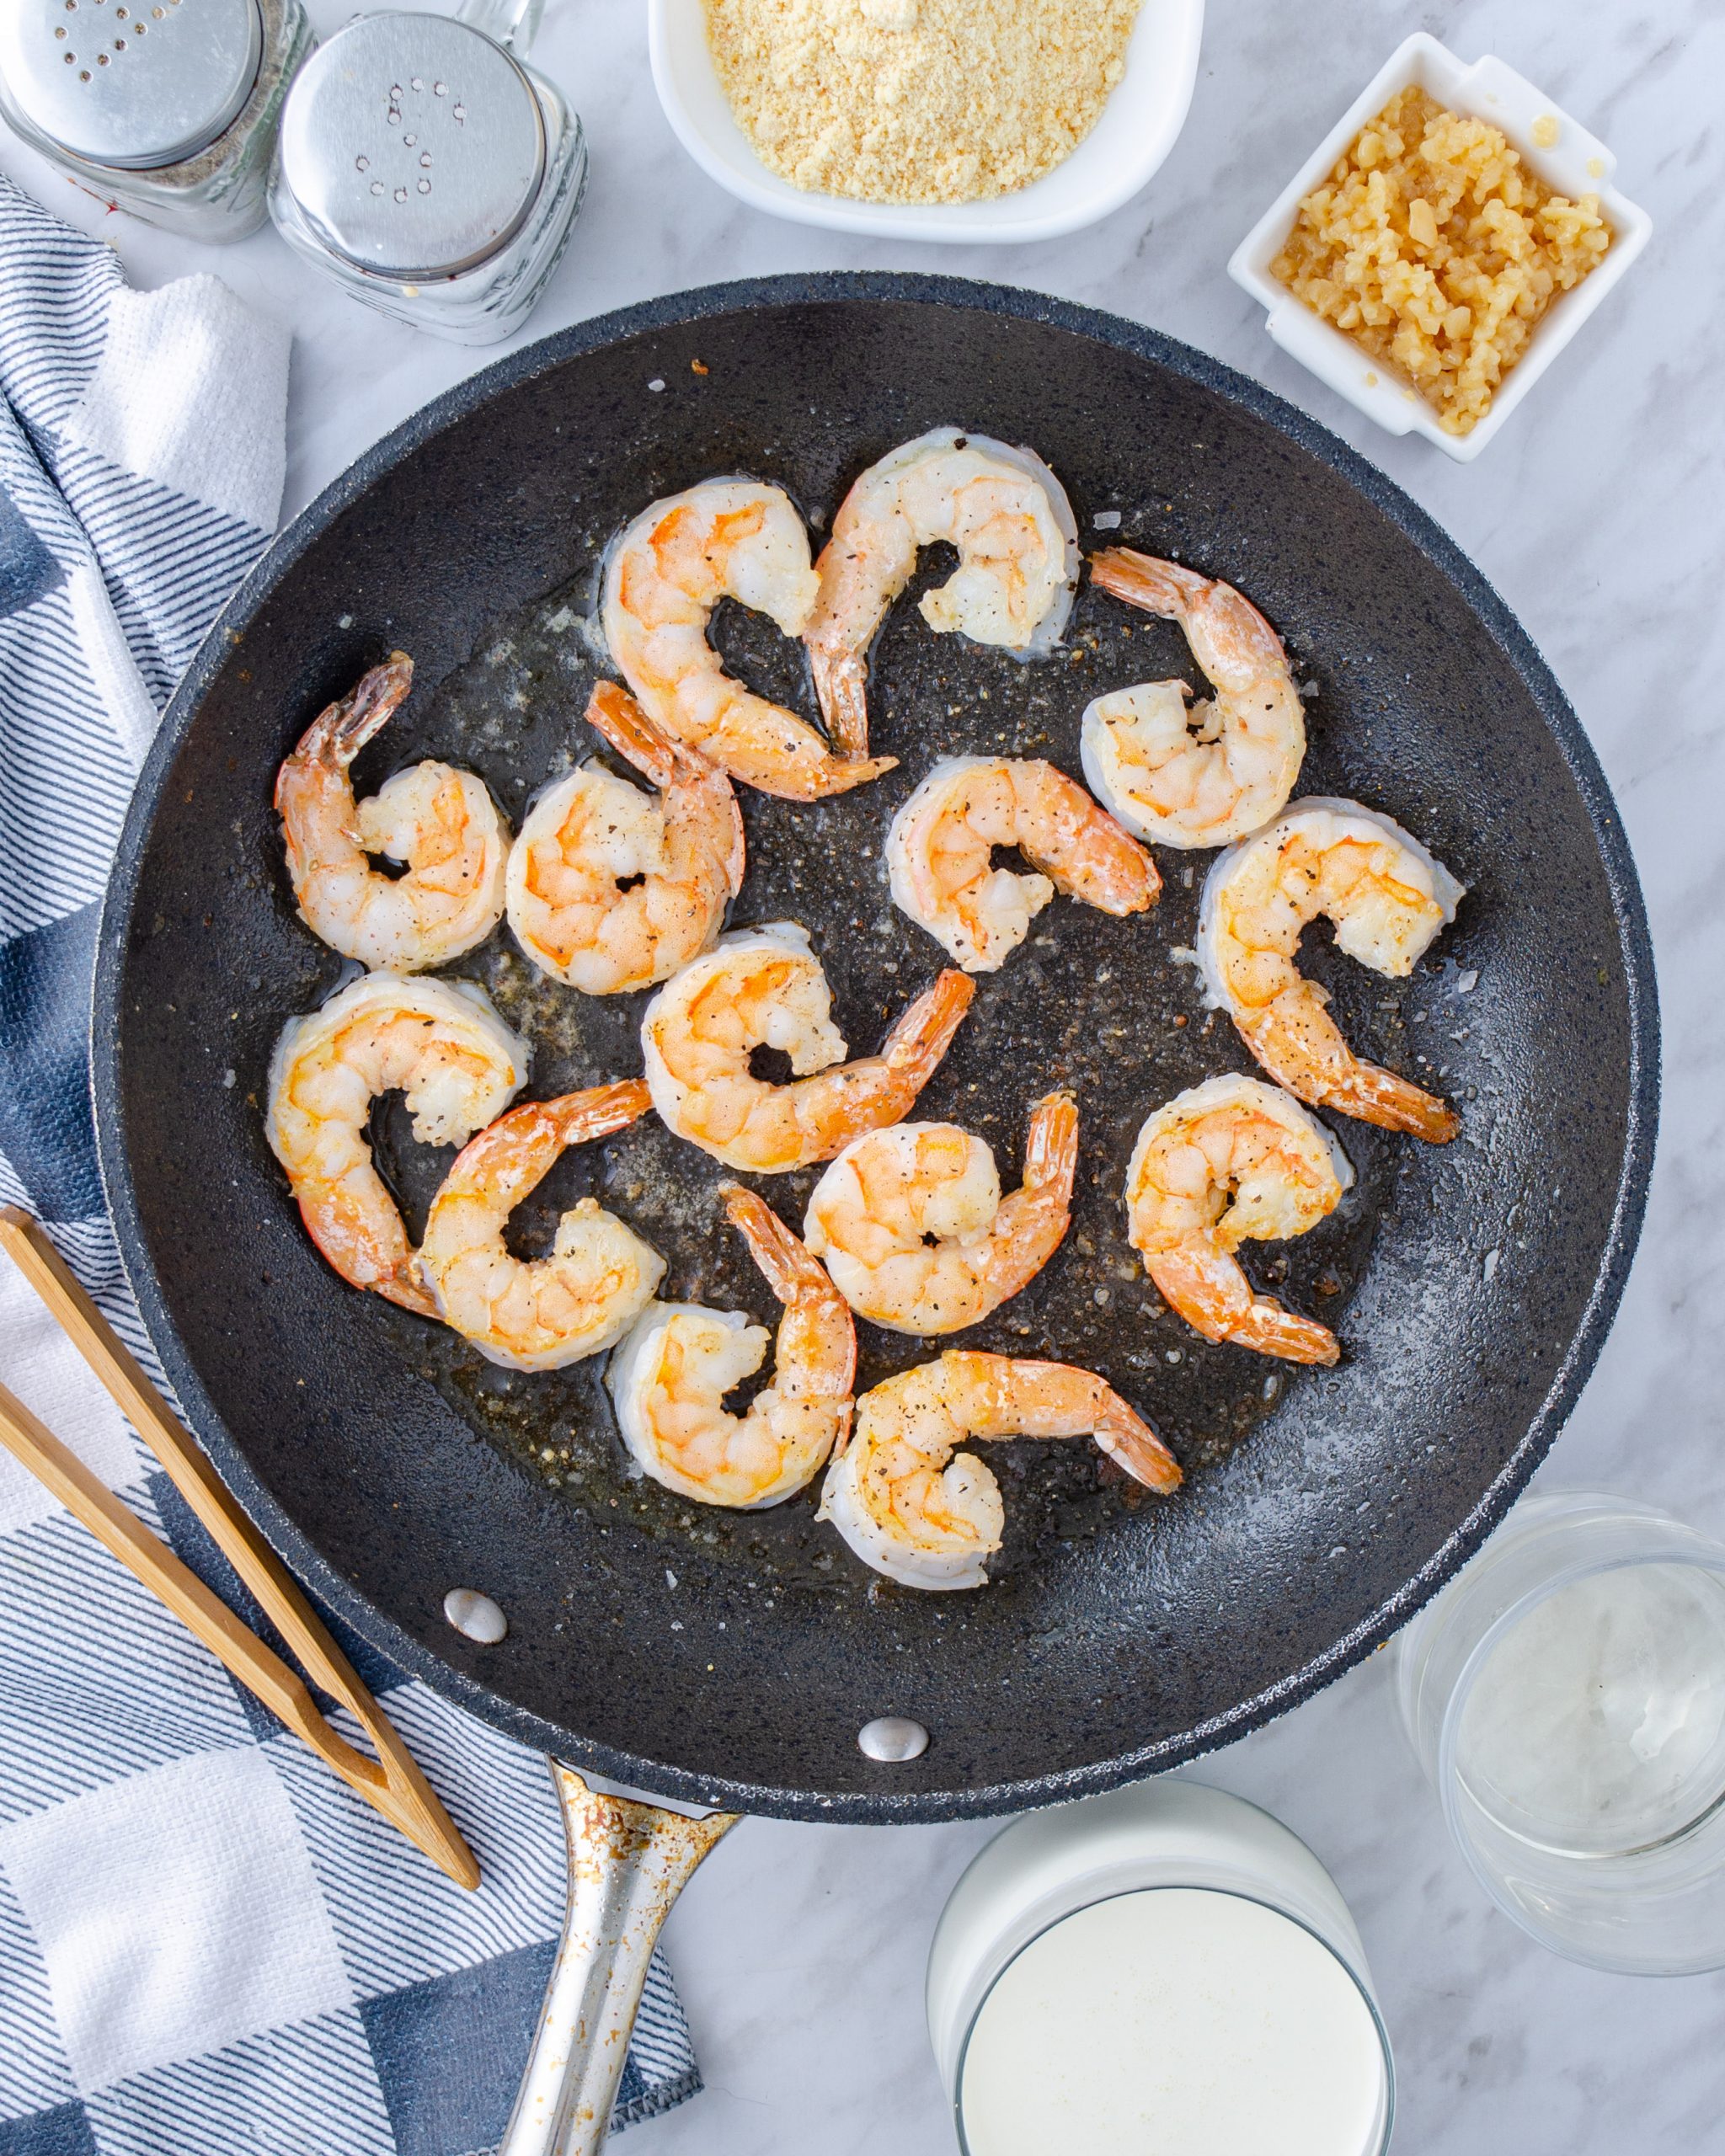 Add the shrimp to the skillet and season with salt and pepper to taste. Saute on both sides until seared and cooked through. Remove and set aside.